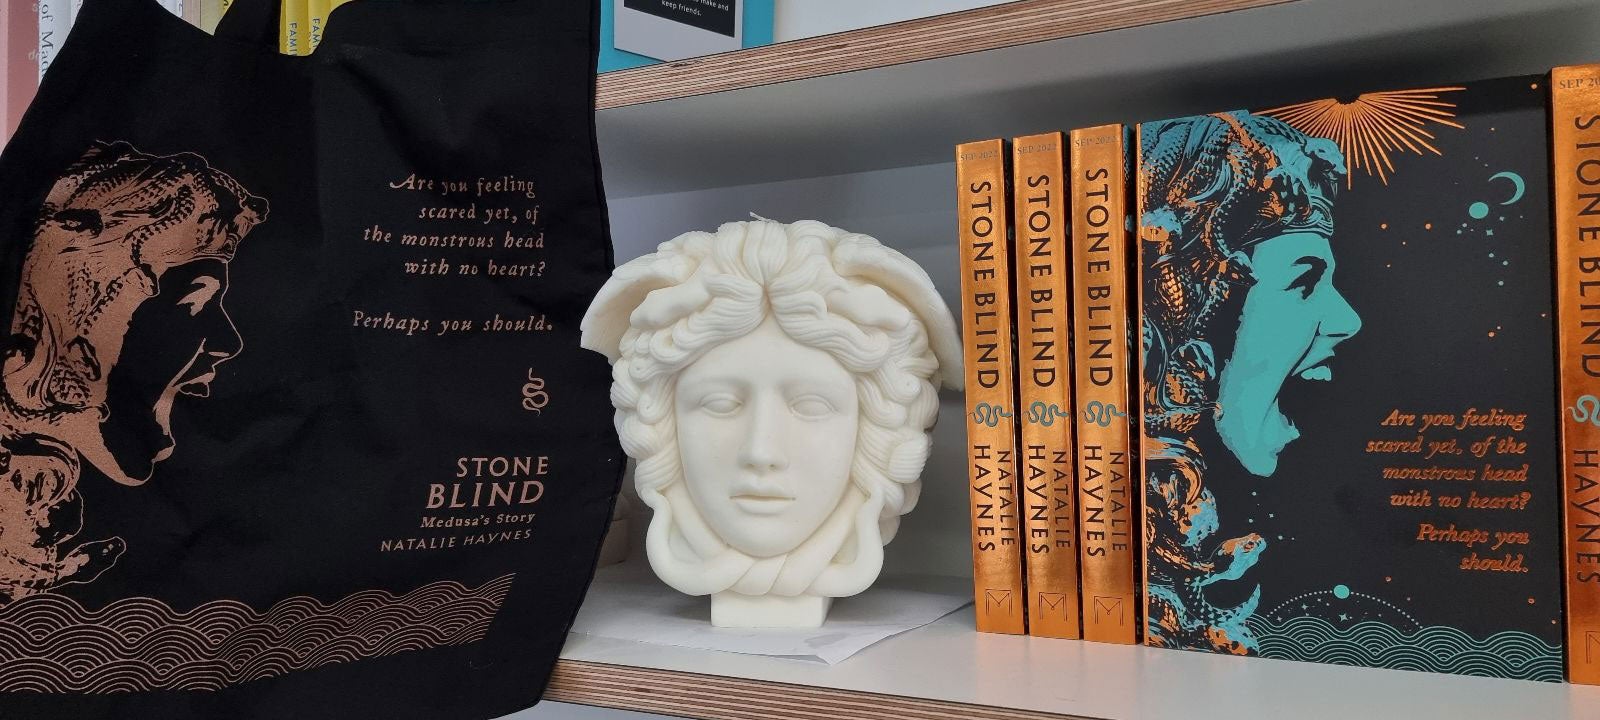 Proof copies of Stone Blind sit on a book shelf alongside a marble Medusa head and a Stone Blind themed tote bag.